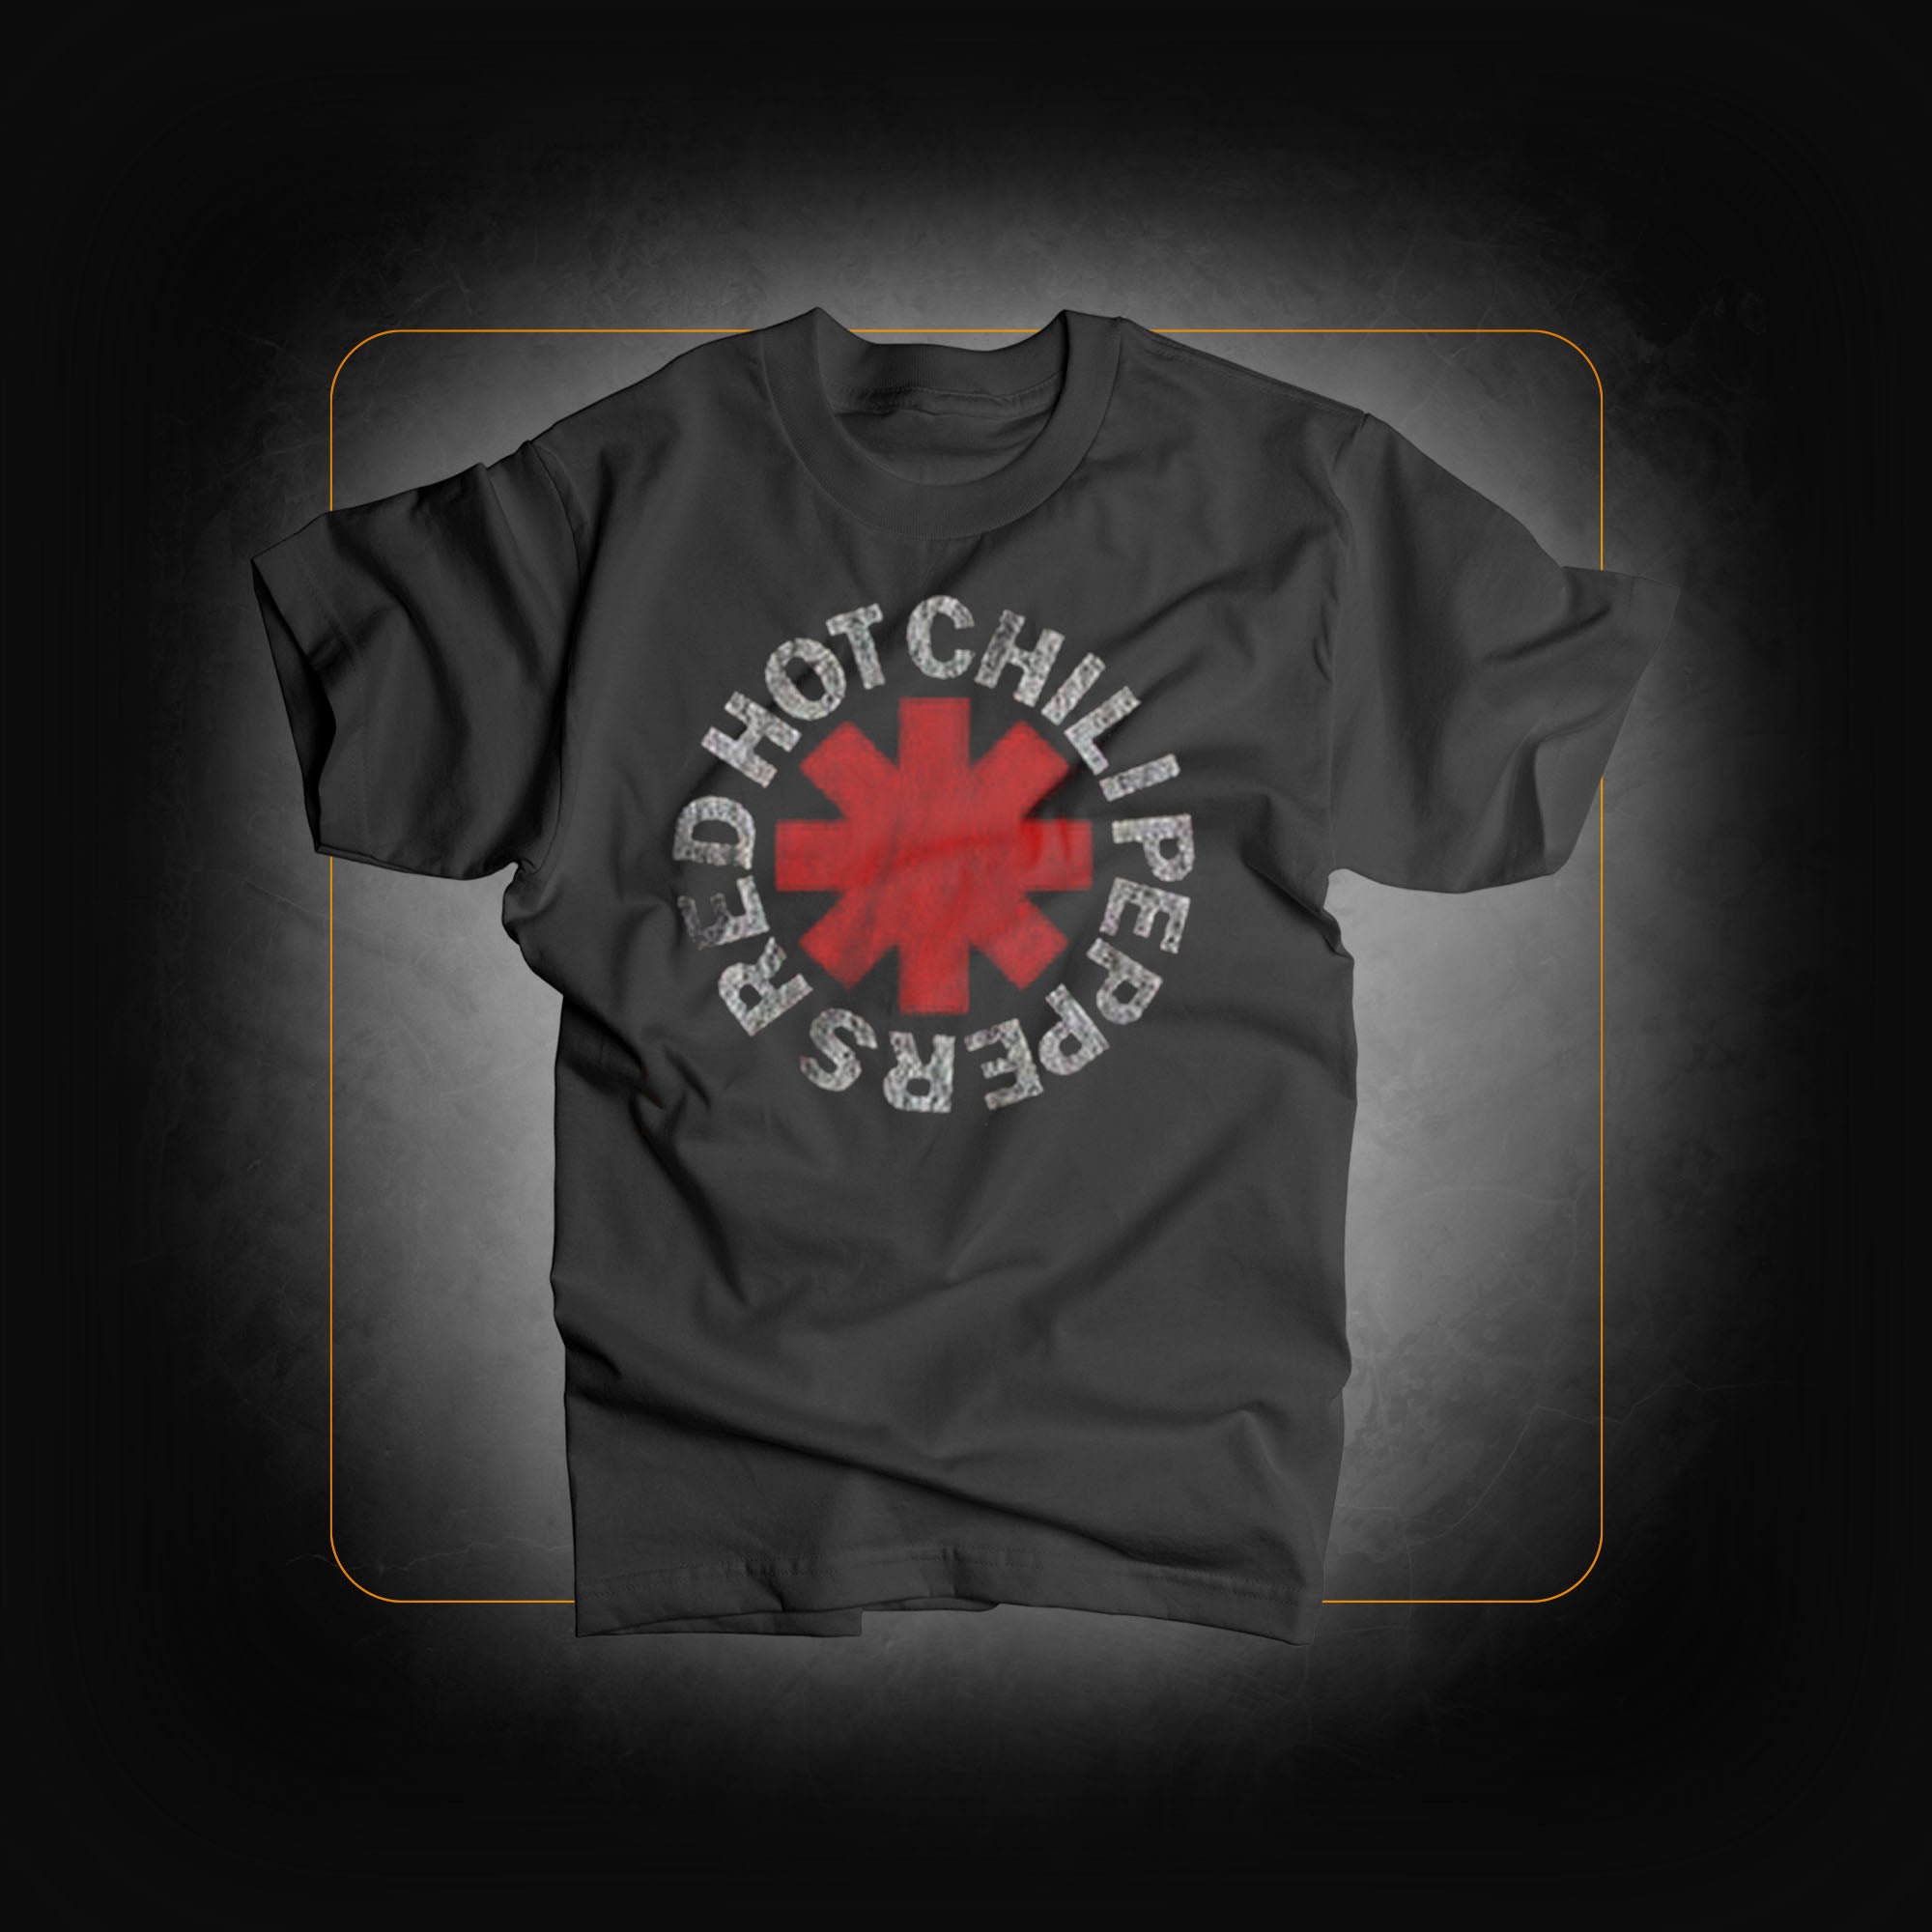 Distressed Asterisk T-Shirt - Red Hot Chili Peppers